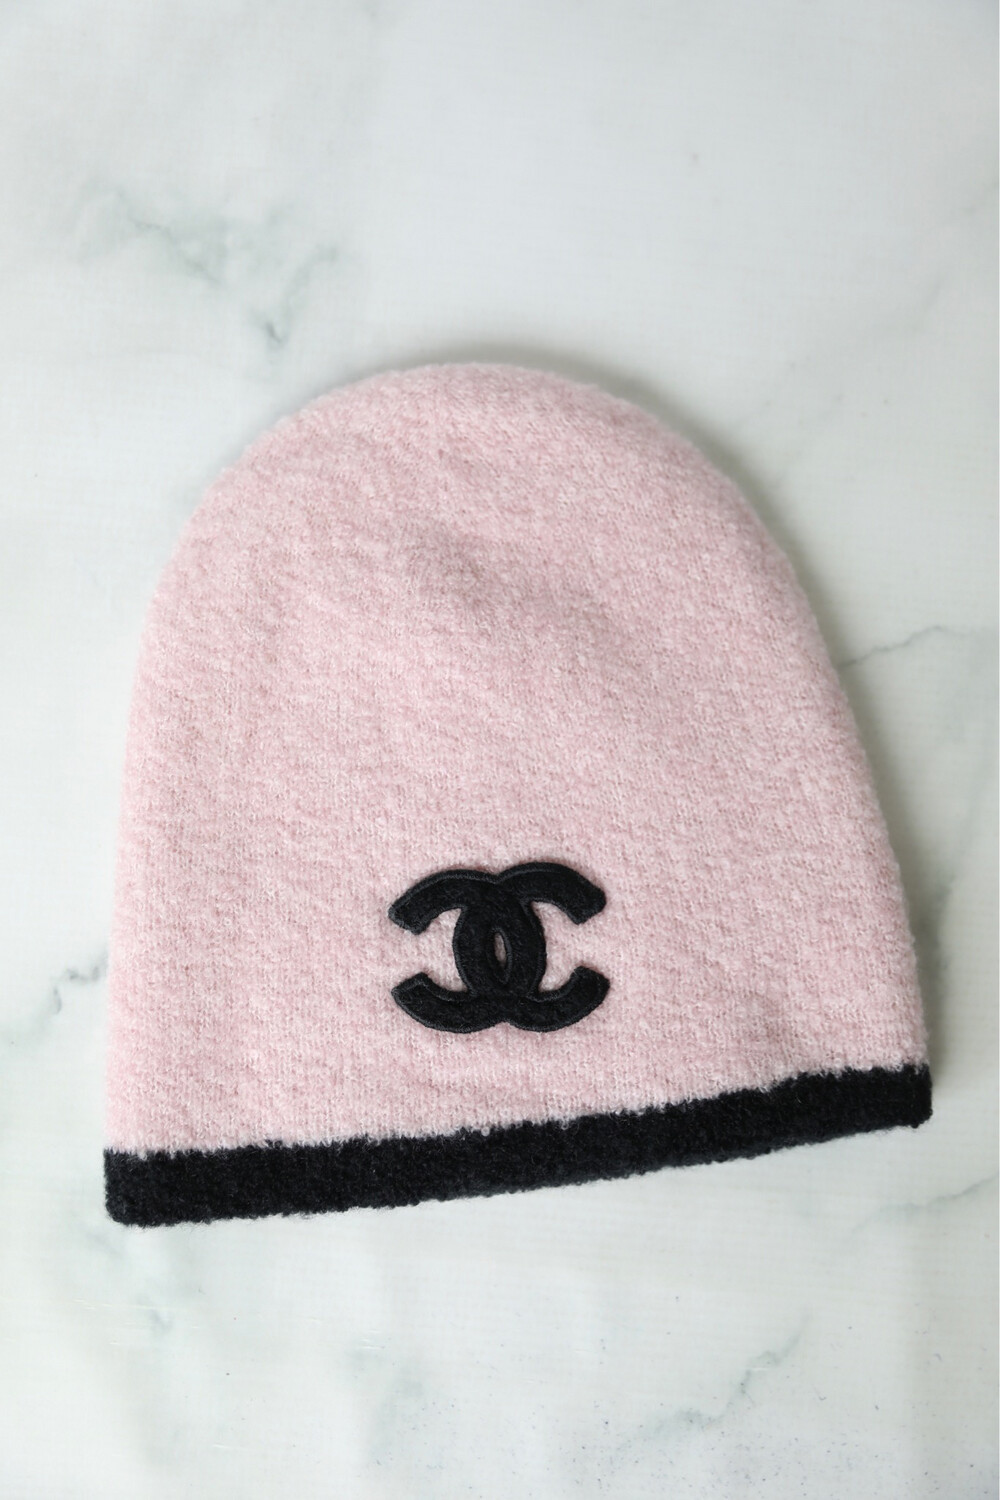 Chanel Hat Beanie, Pink and Black, New without Box MA001 - Julia Rose  Boston | Shop